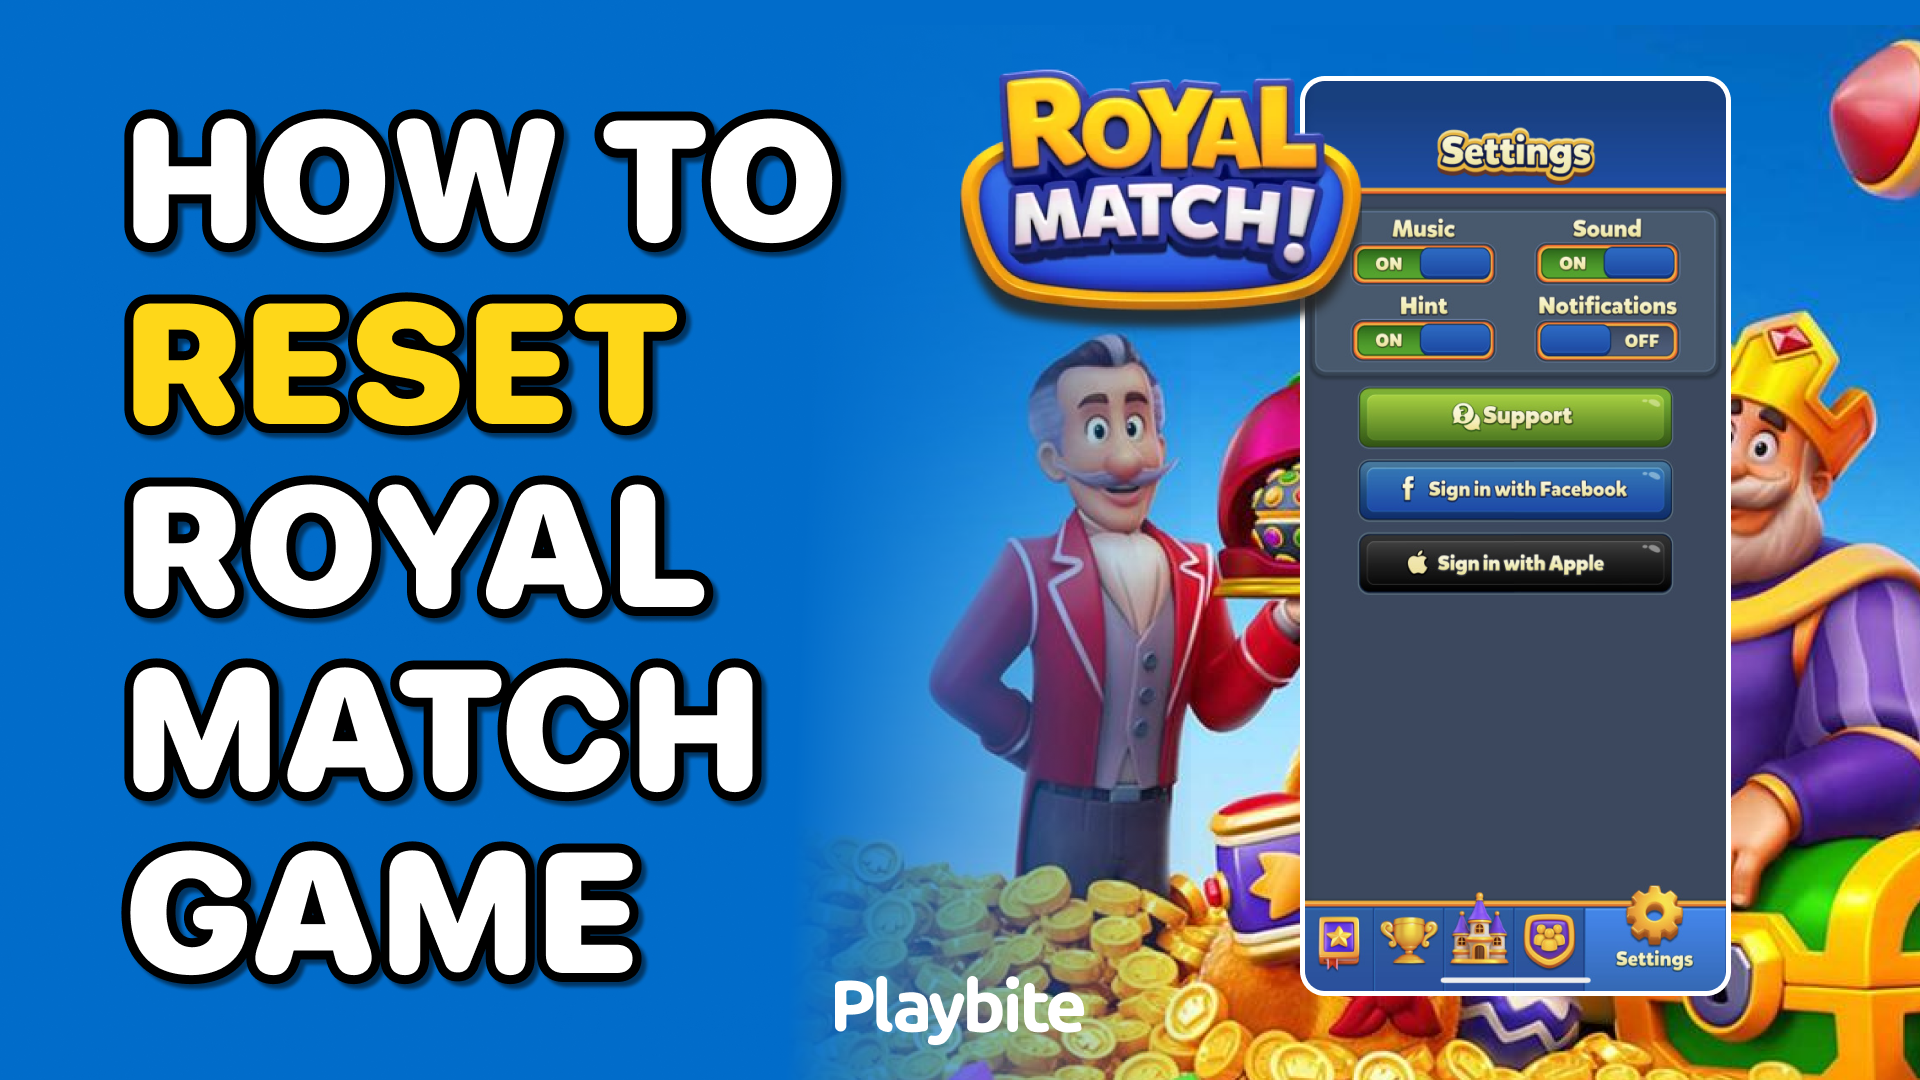 How to Reset Your Royal Match Game